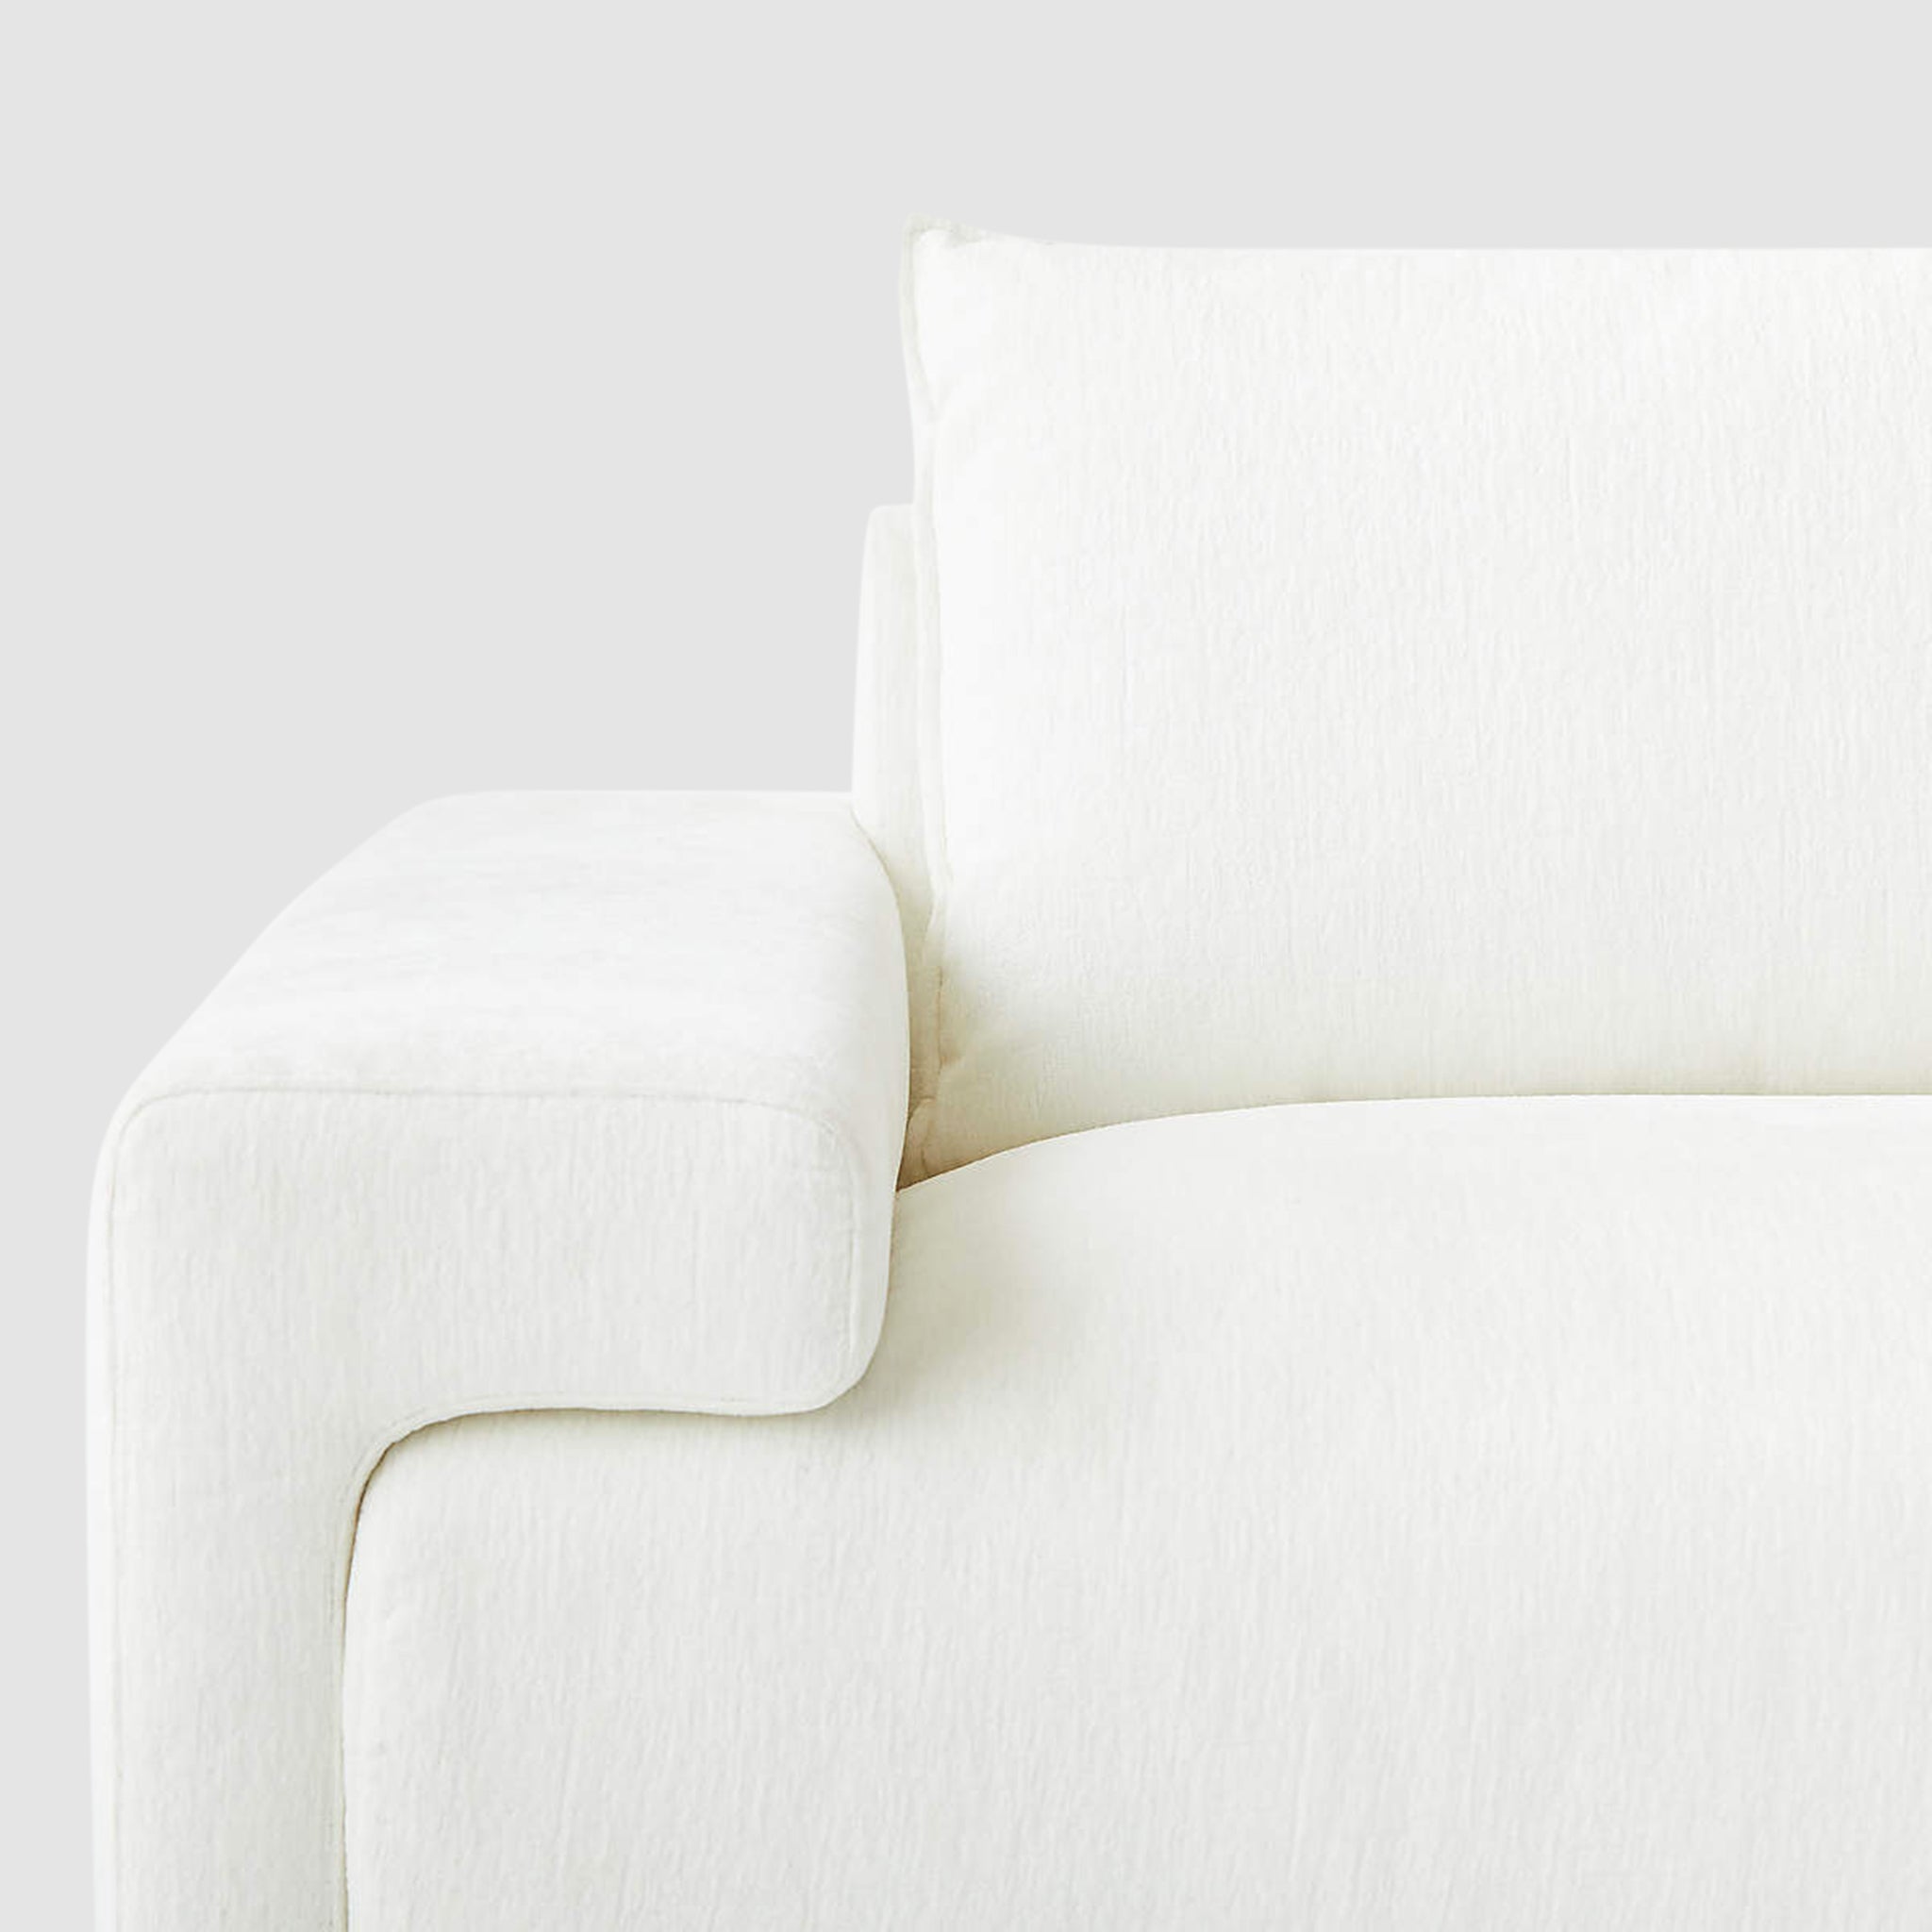 Close-up view of modern minimalist white Sylvia sofa armrest and cushion detailing, highlighting plush comfort and sleek design for a stylish living room